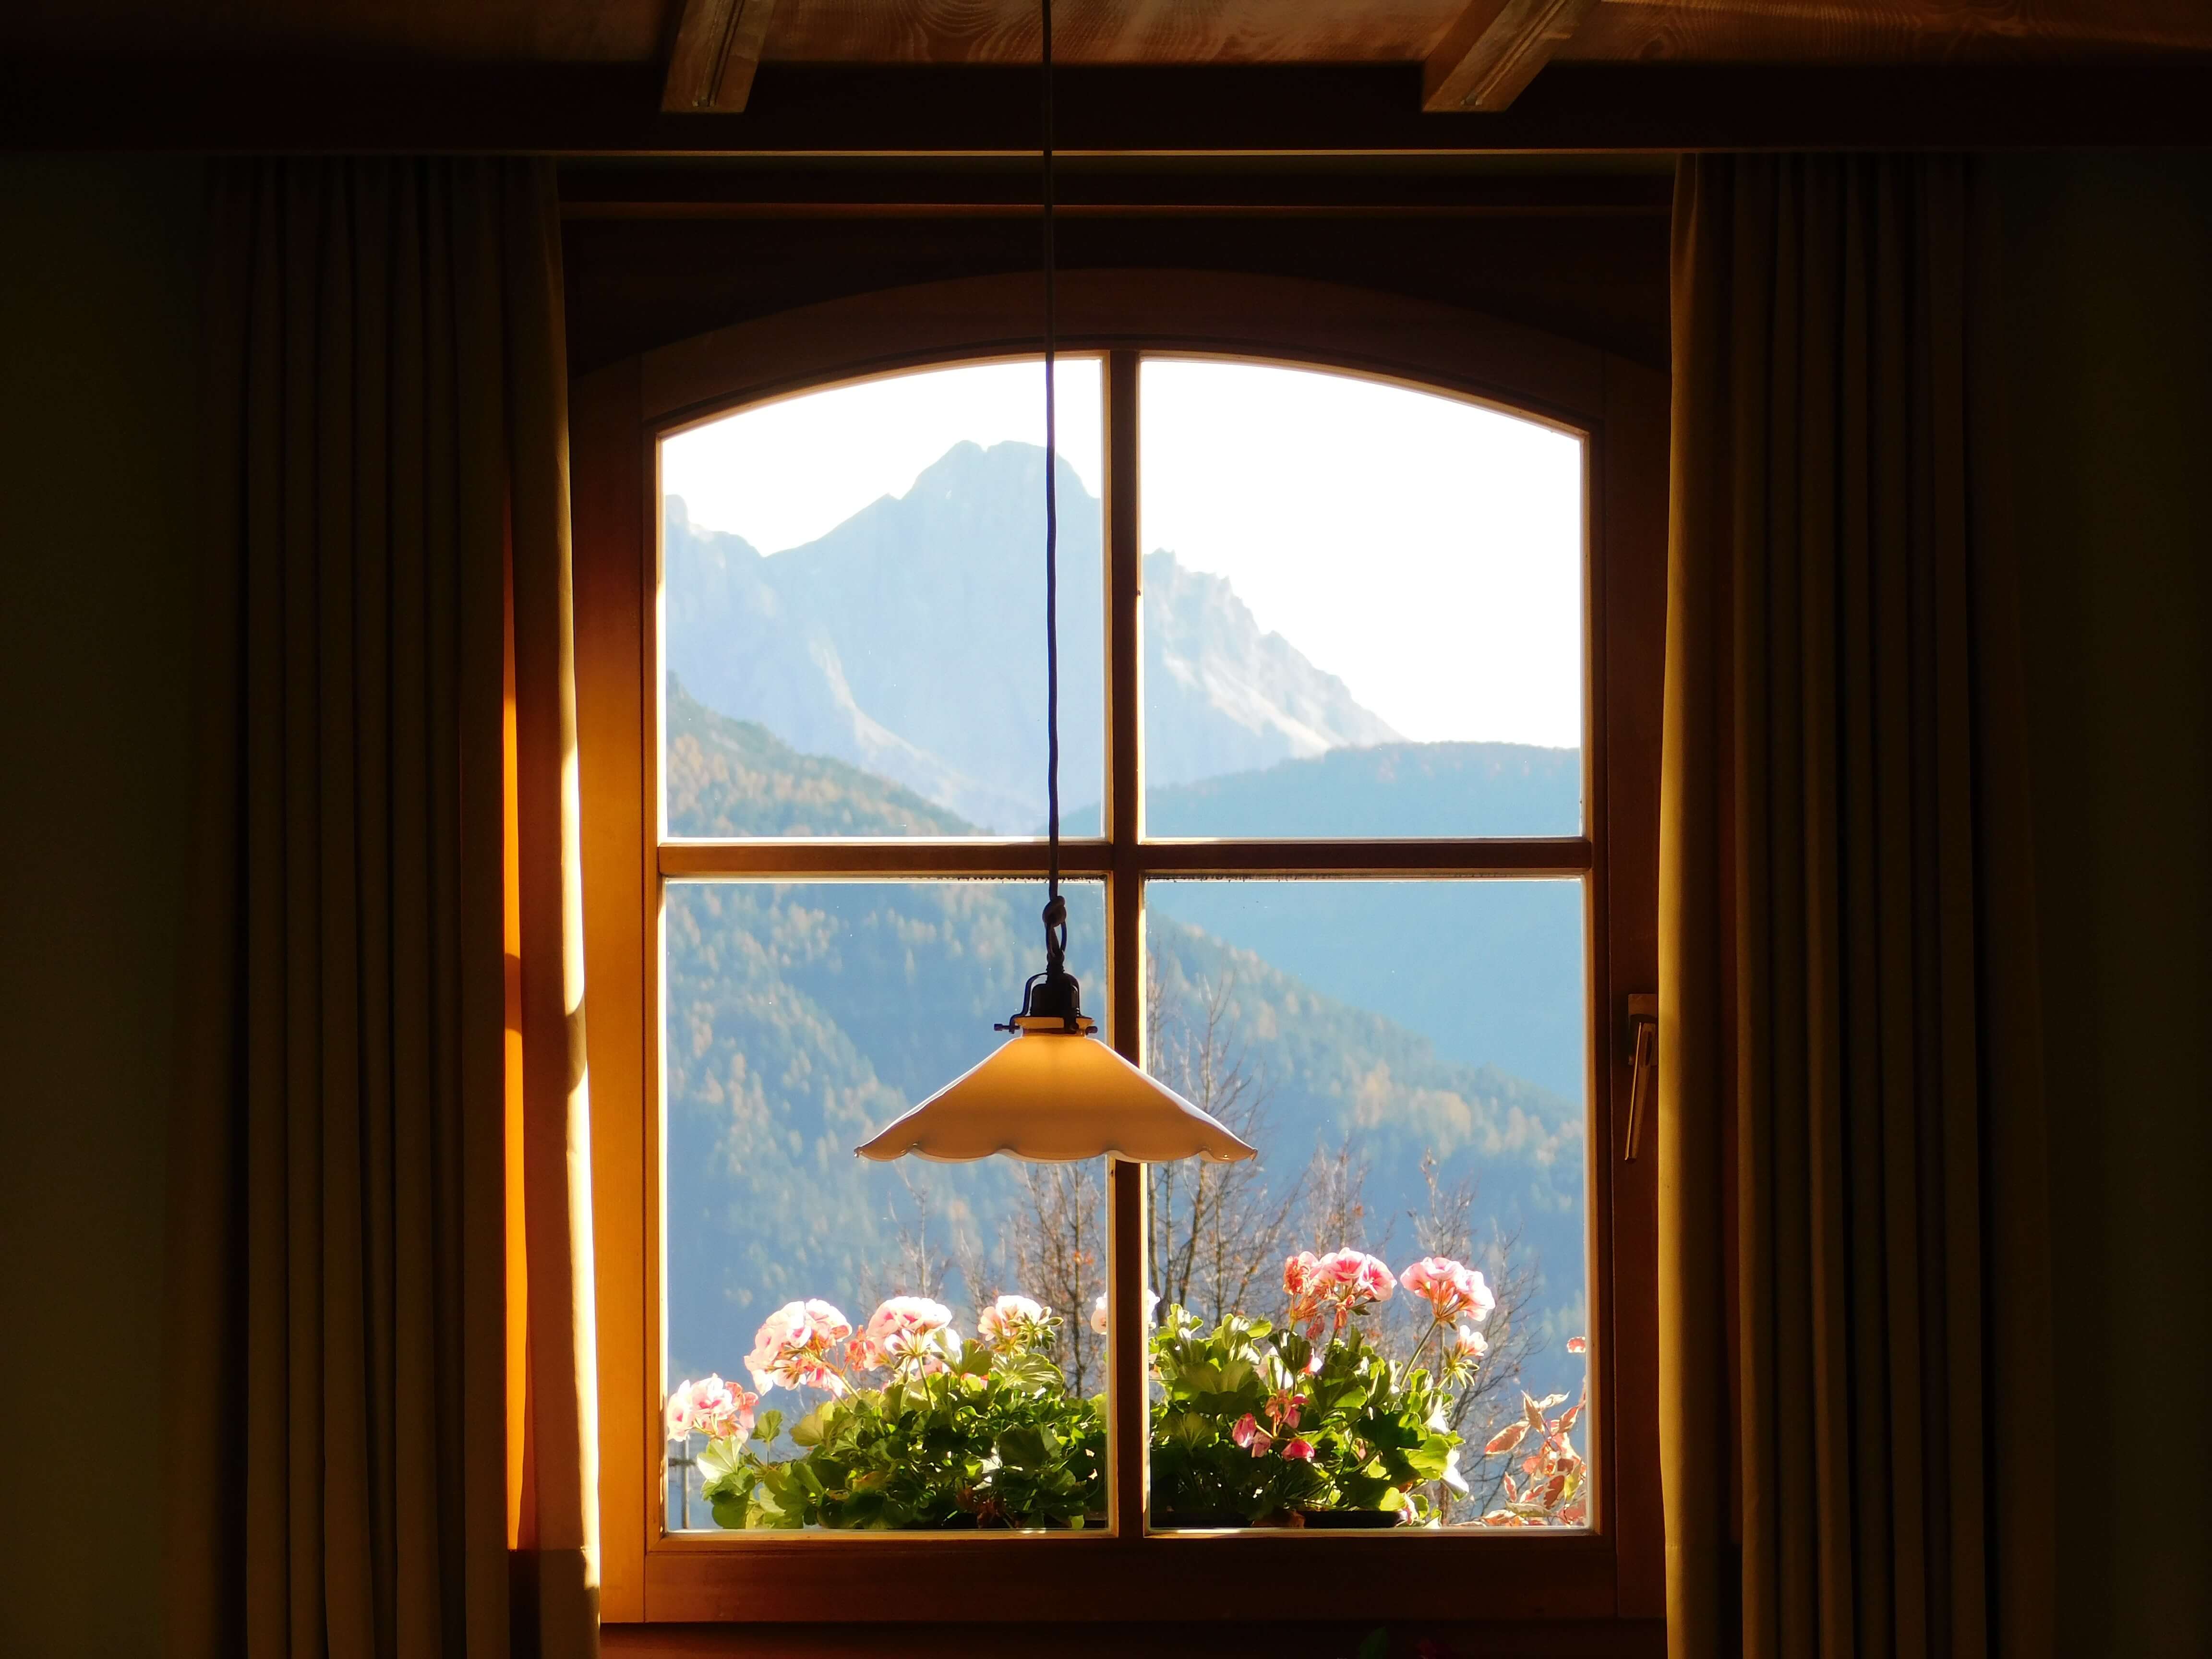 Picture window overlooking the mountains